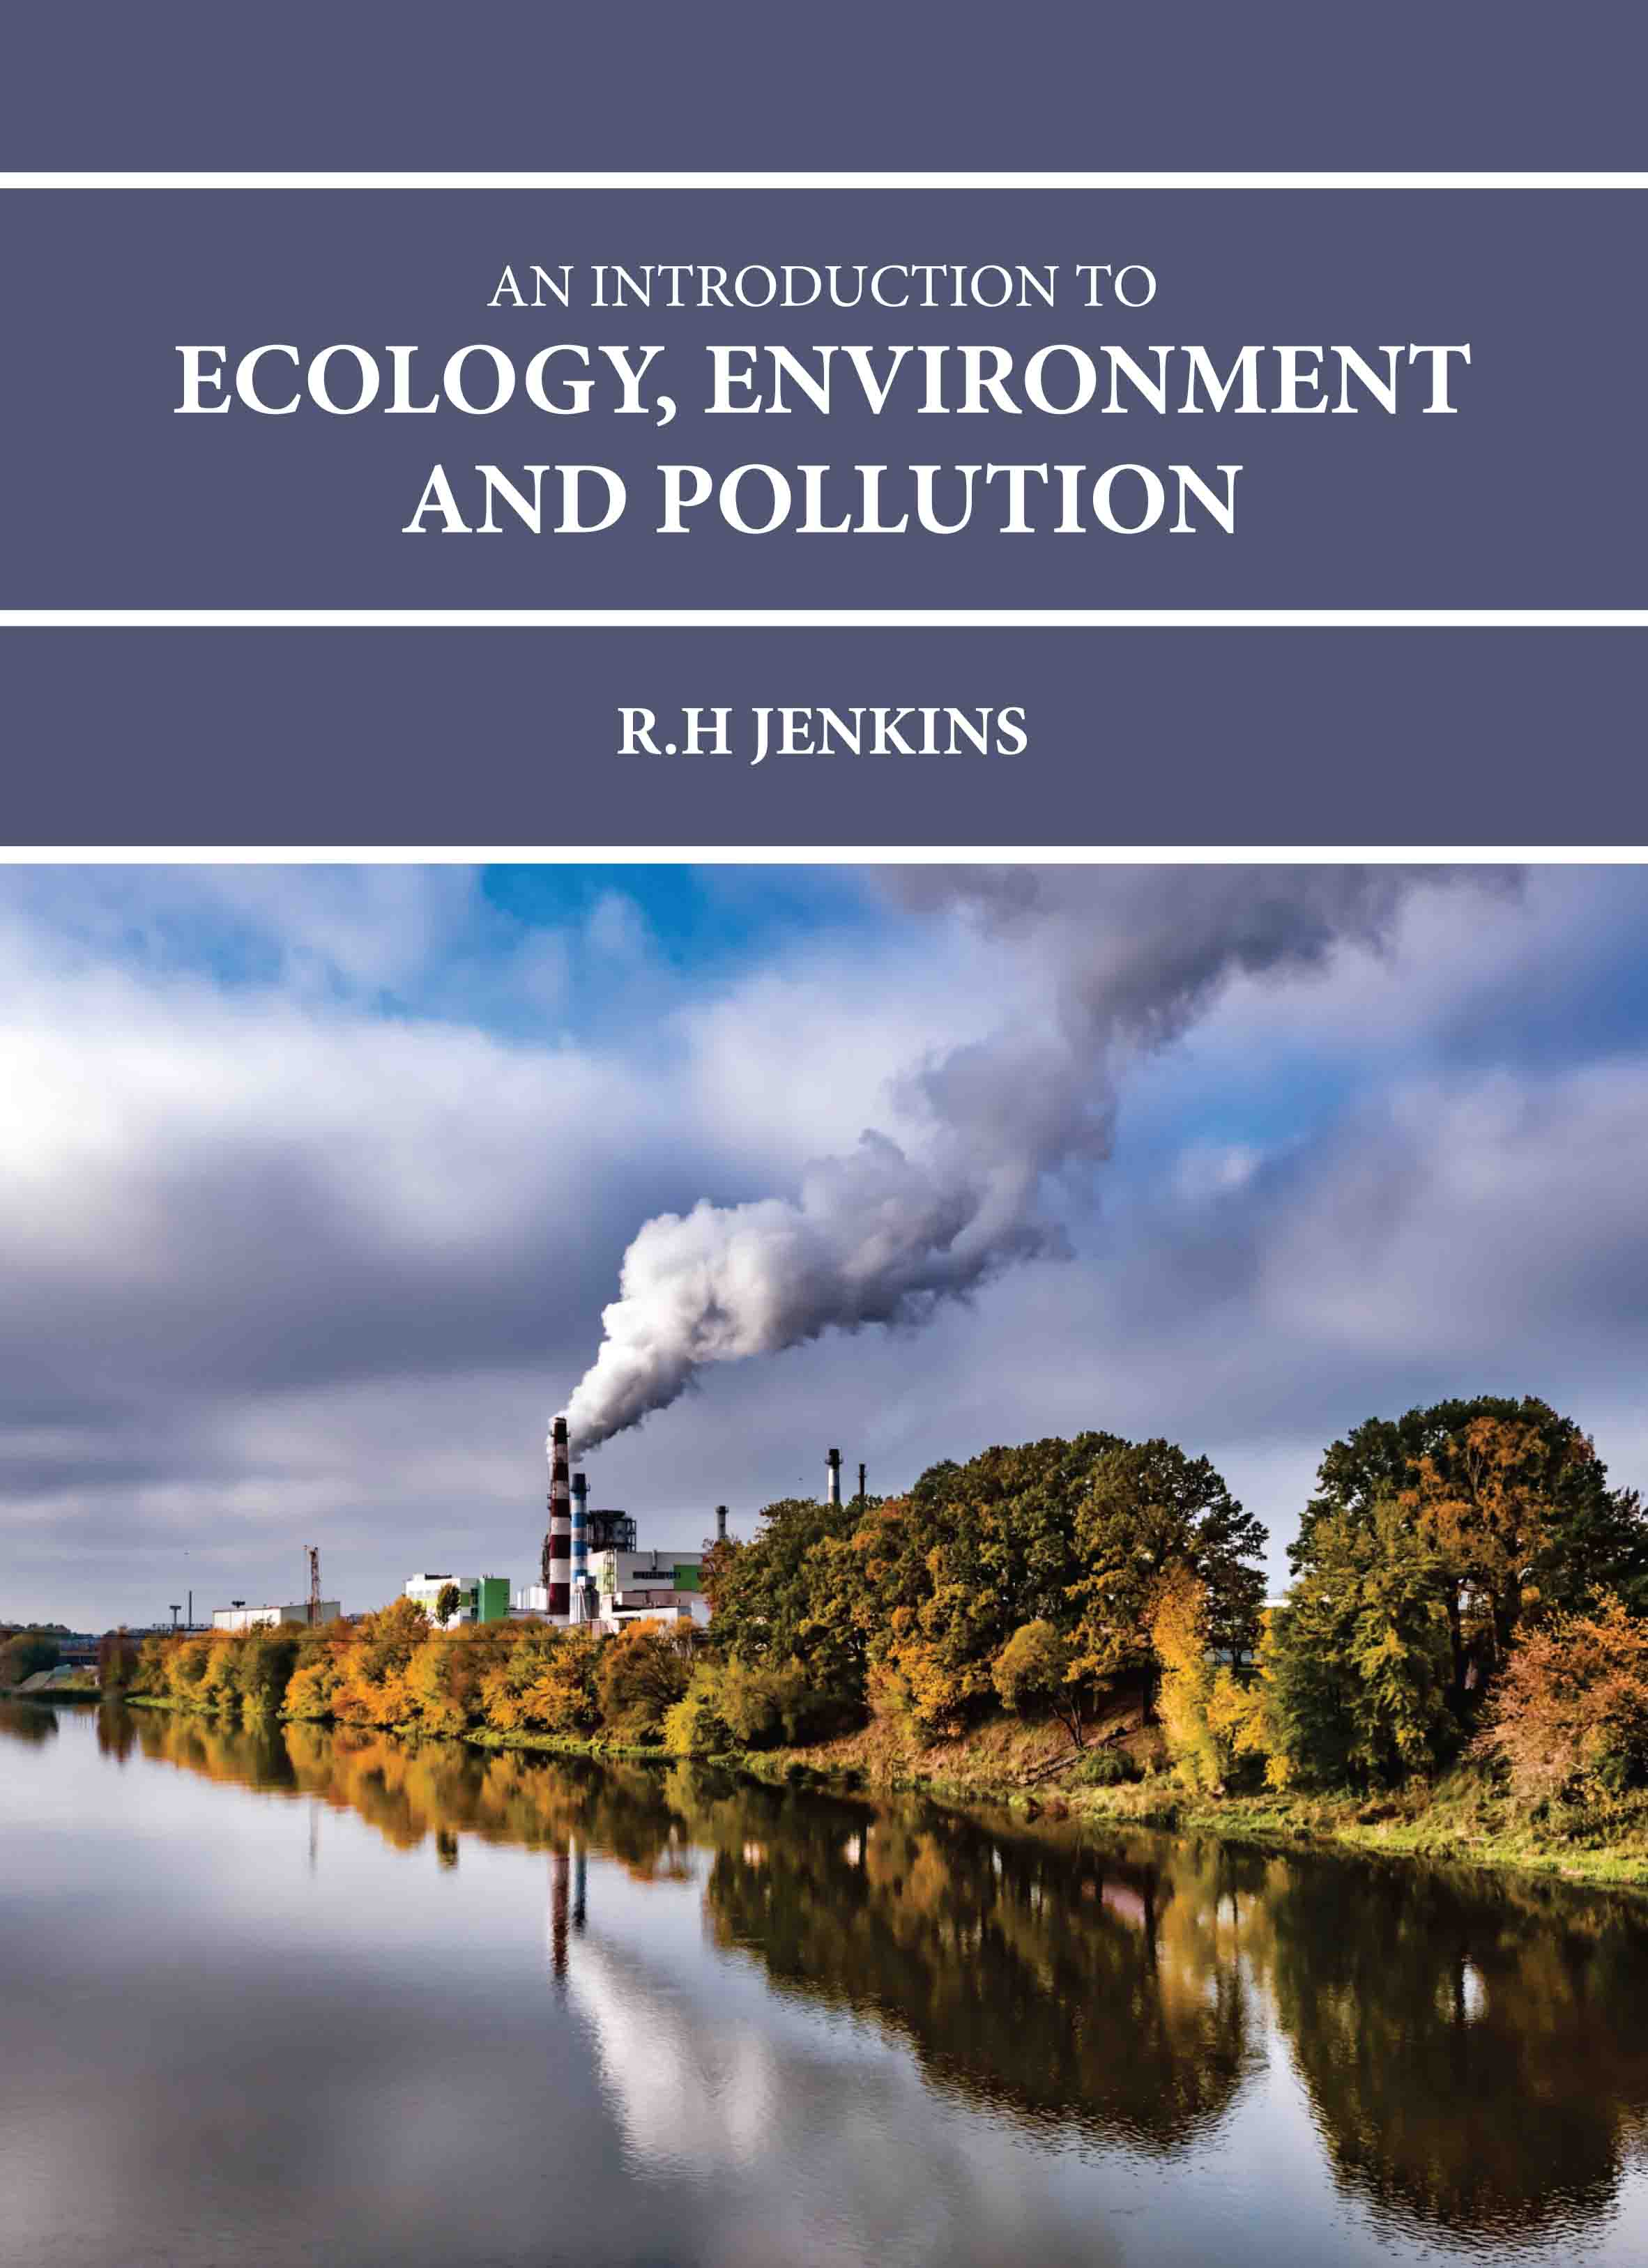 An Introduction to Ecology, Environment and Pollution